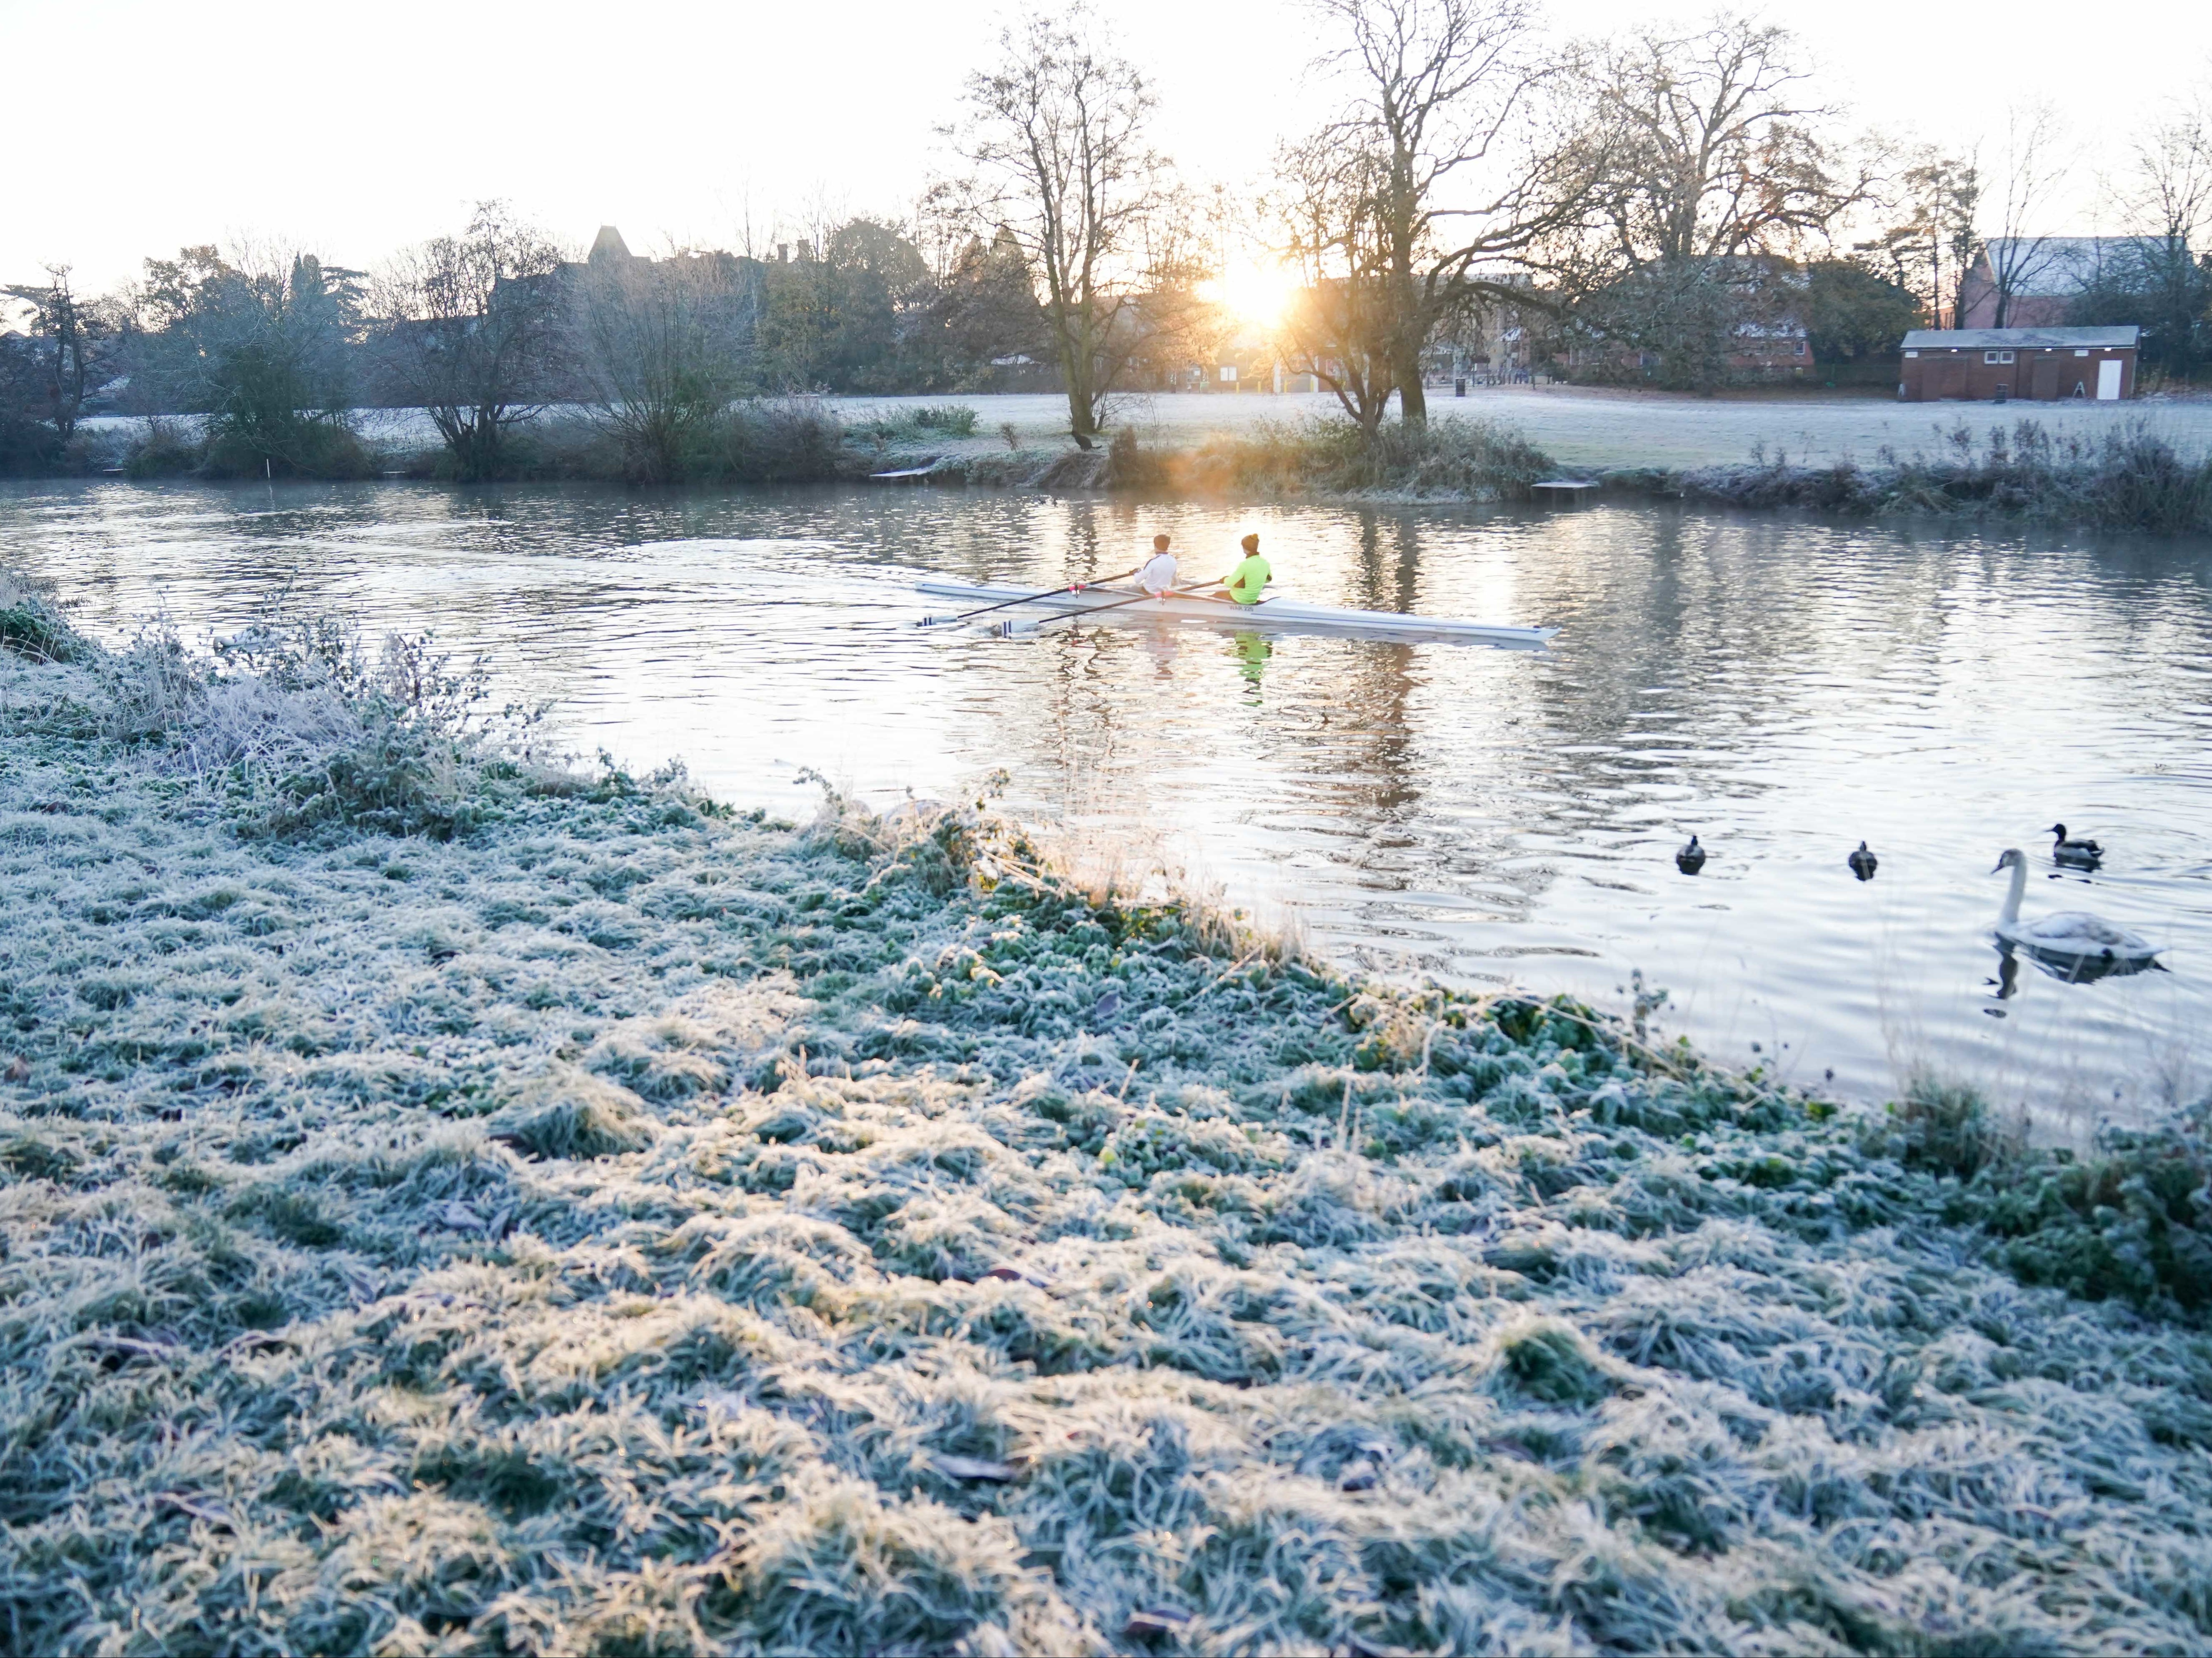 The UK has been hit by freezing conditions